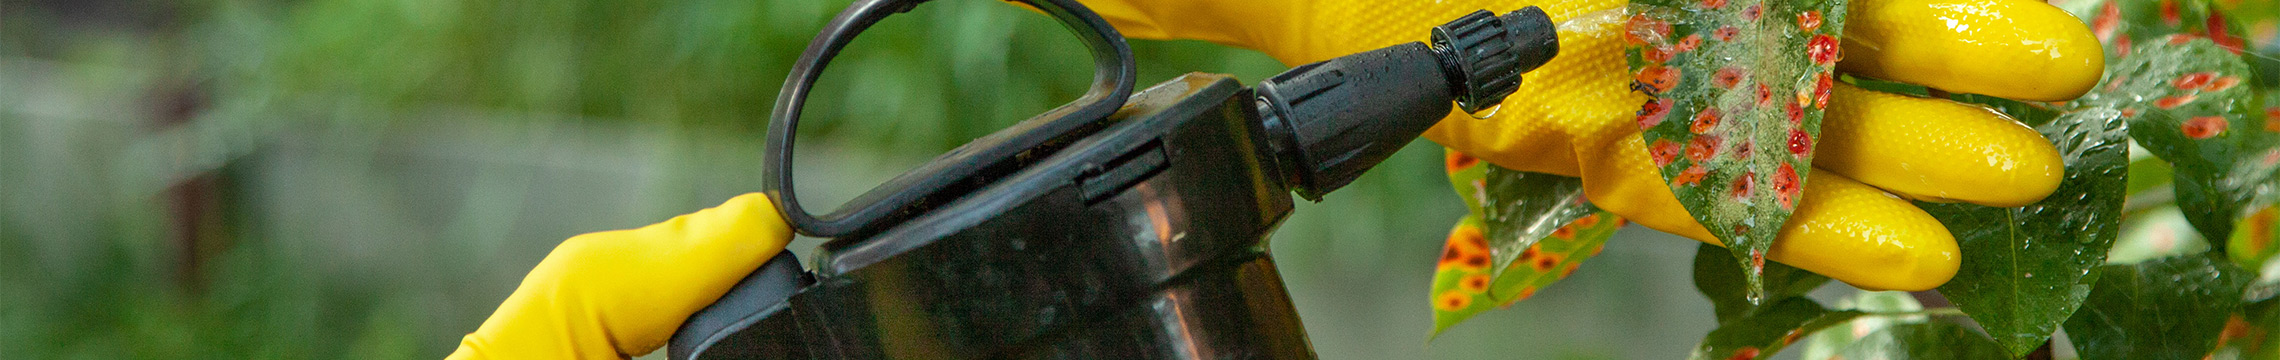 Yellow rubber gloves holding a spotted leaf while being treated with an orange sprayer